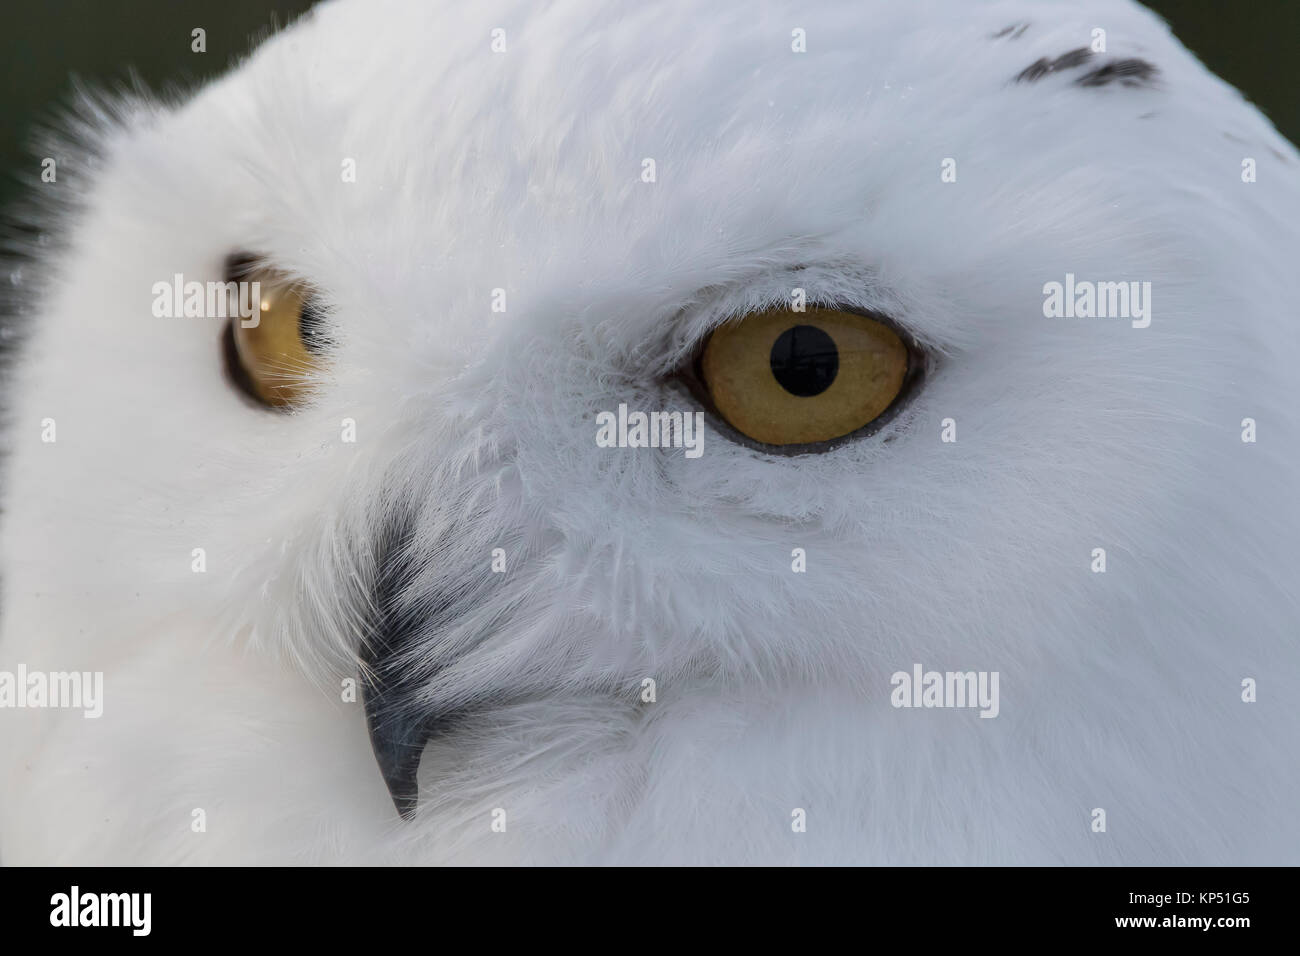 snowy owl, Bubo scandiacus, close up portrait of face and eye detail during winter in scotland. Stock Photo